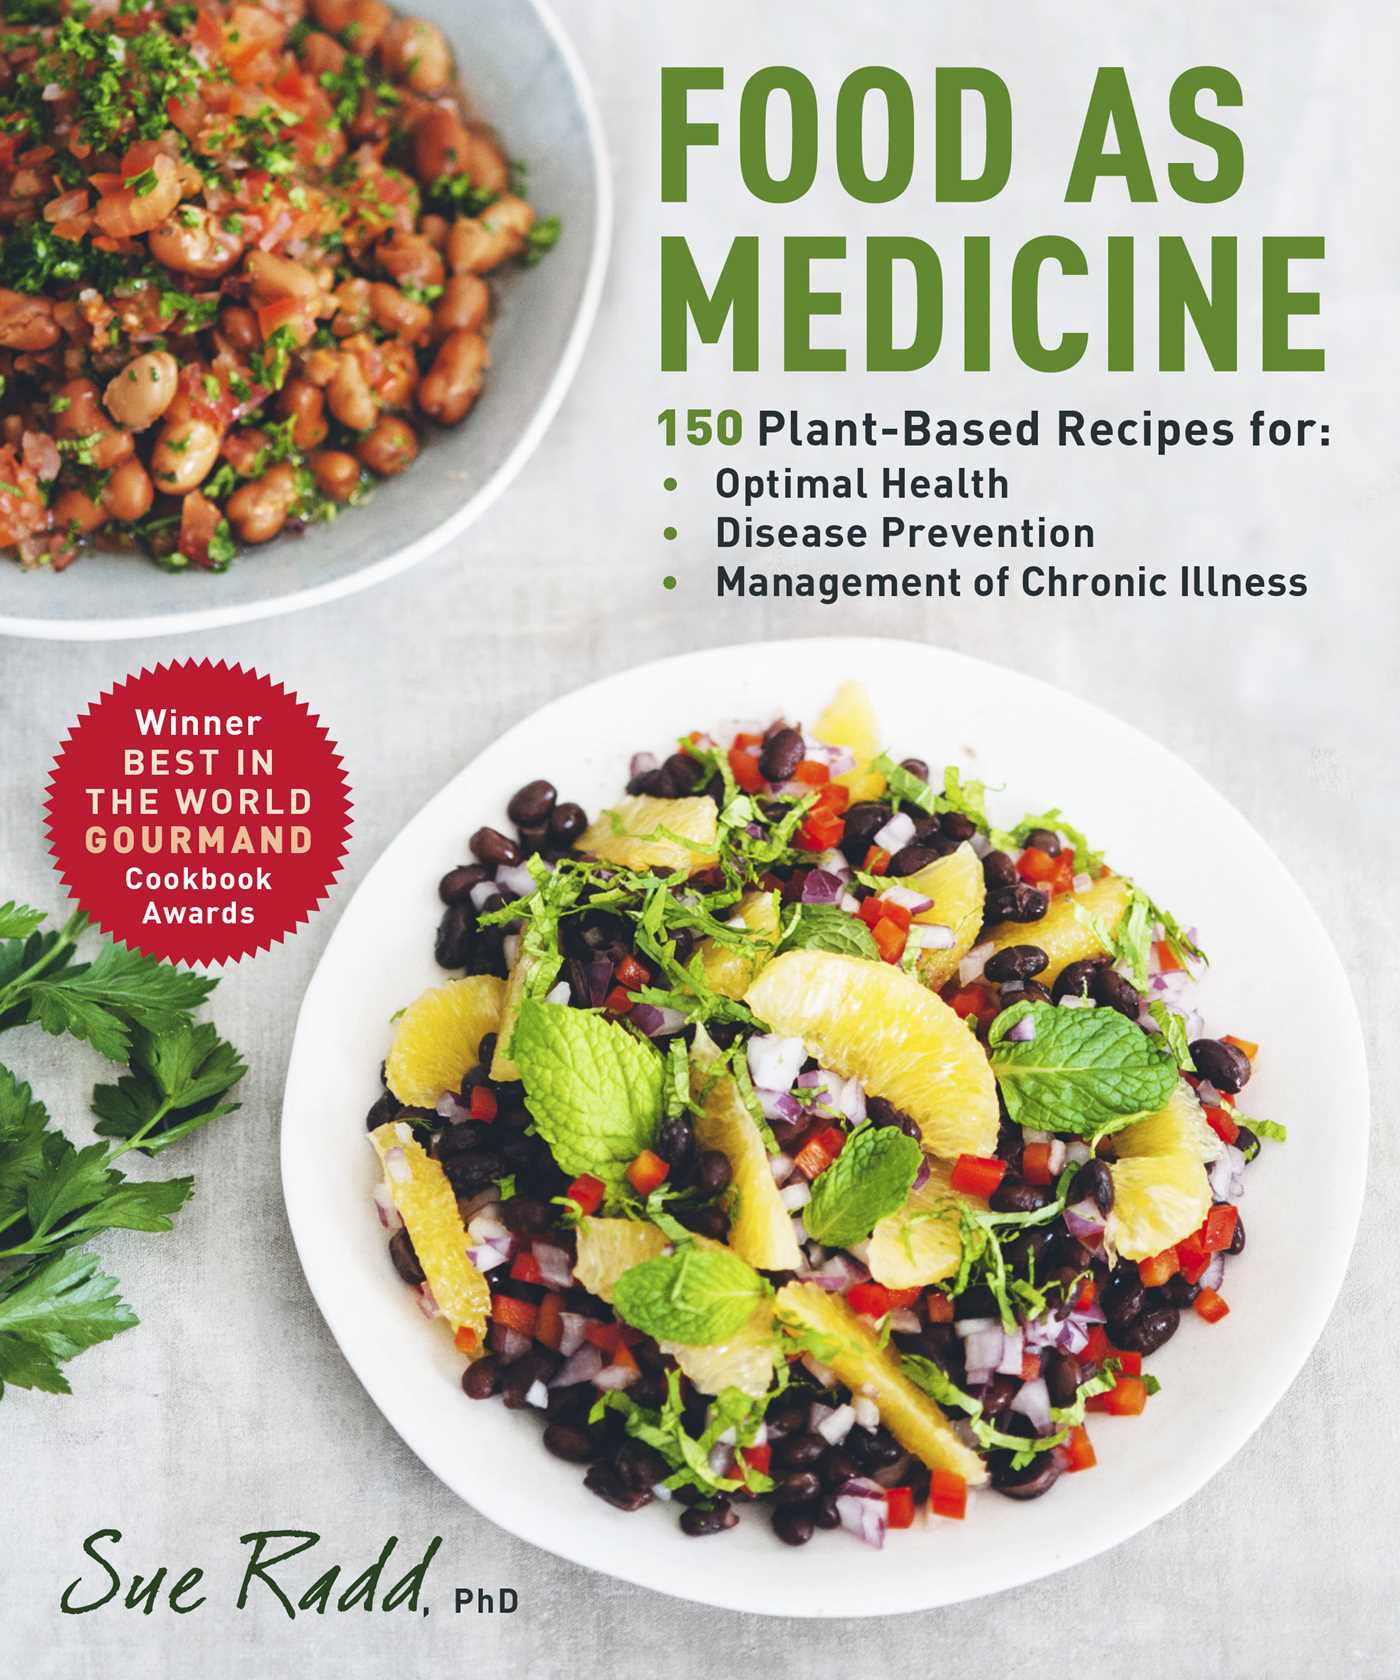 Food as Medicine: 150 Plant-Based Recipes for Optimal Health, Disease Prevention, and Management of Chronic Illness PDF